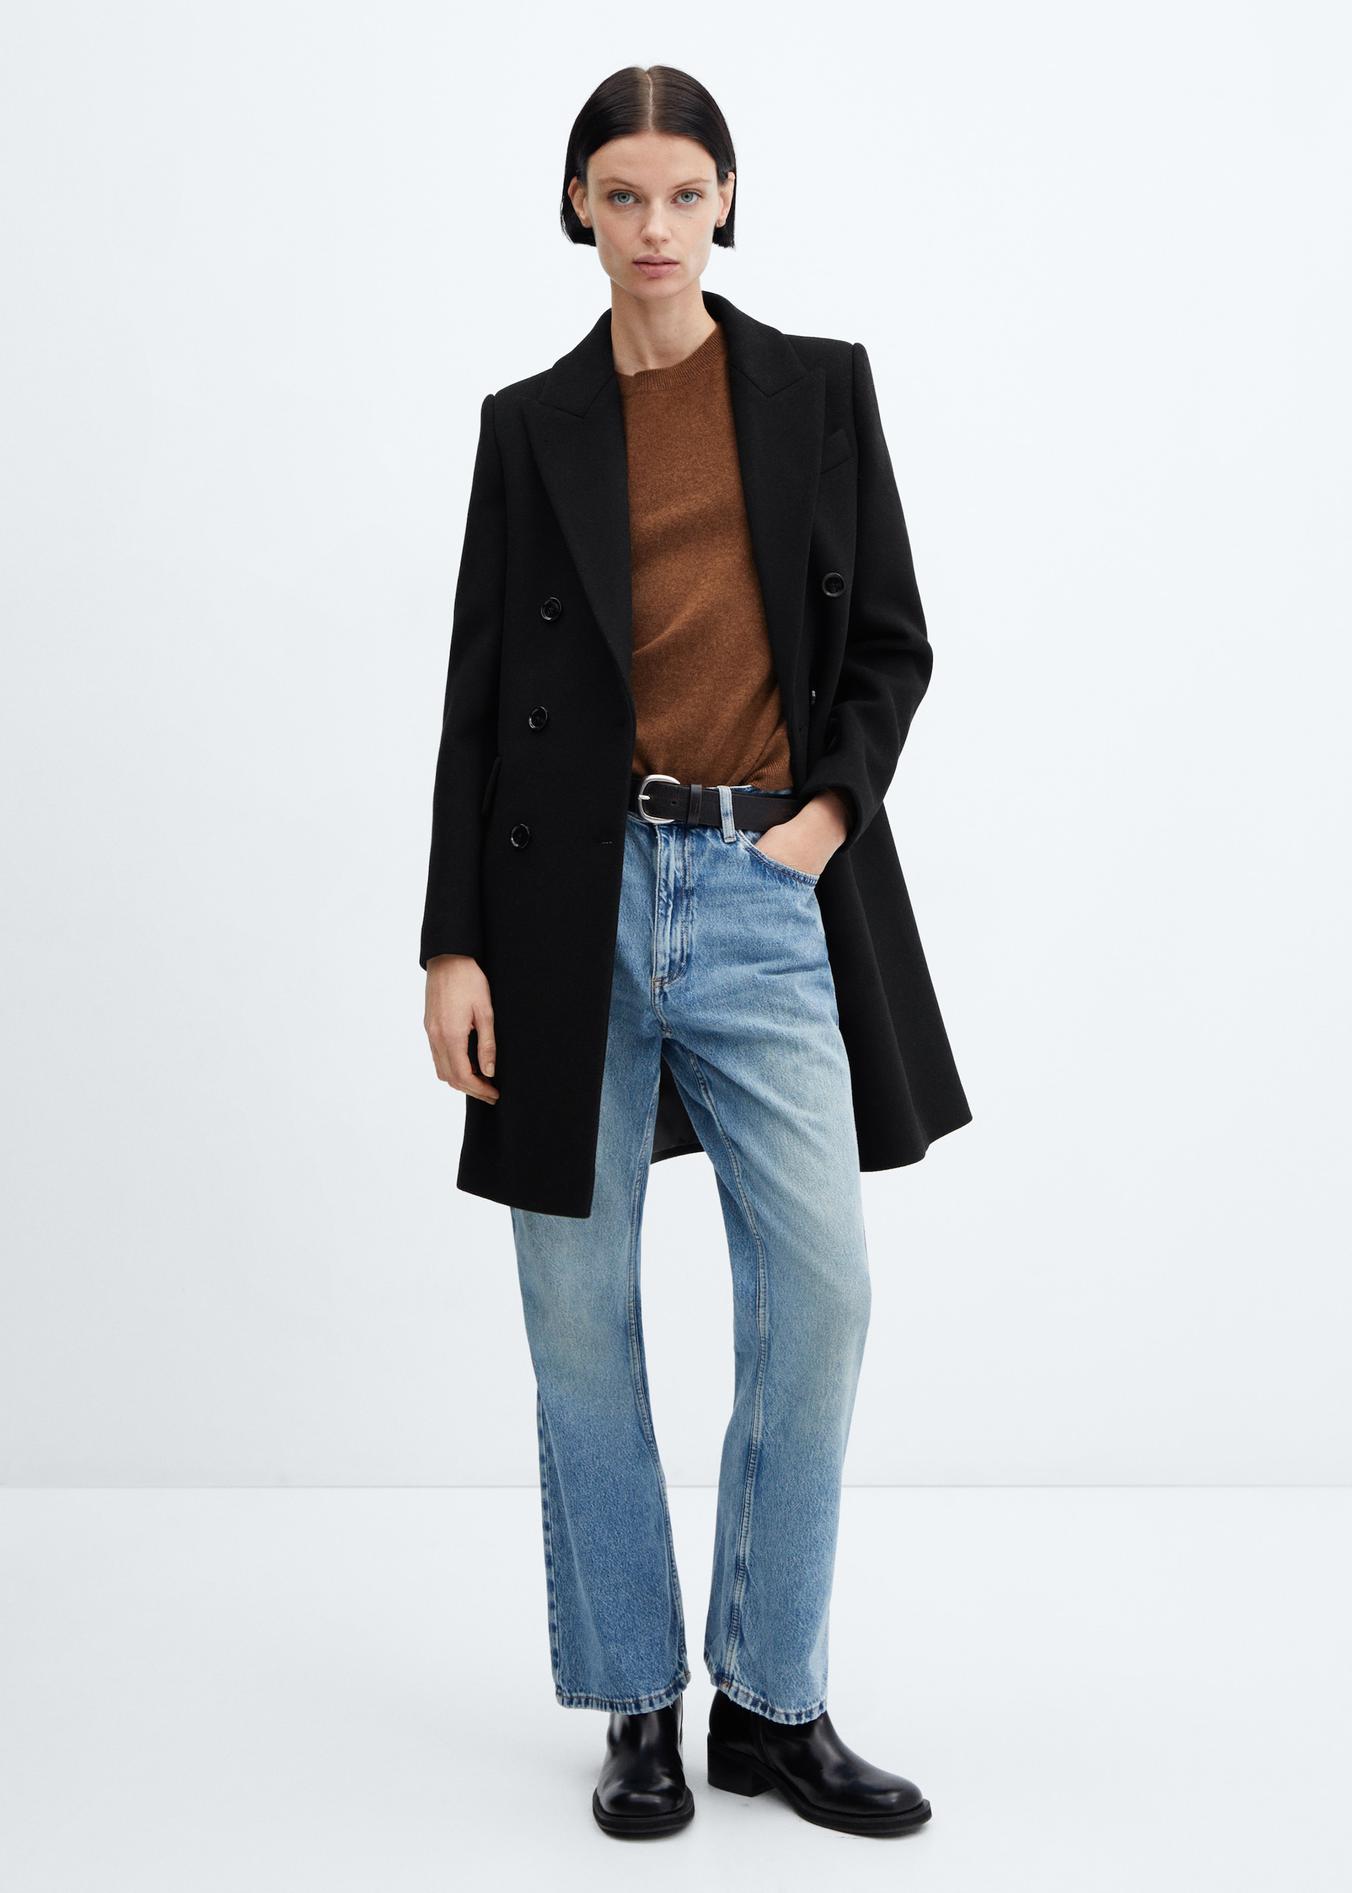 Double-breasted wool coat offers at S$ 79.9 in Mango